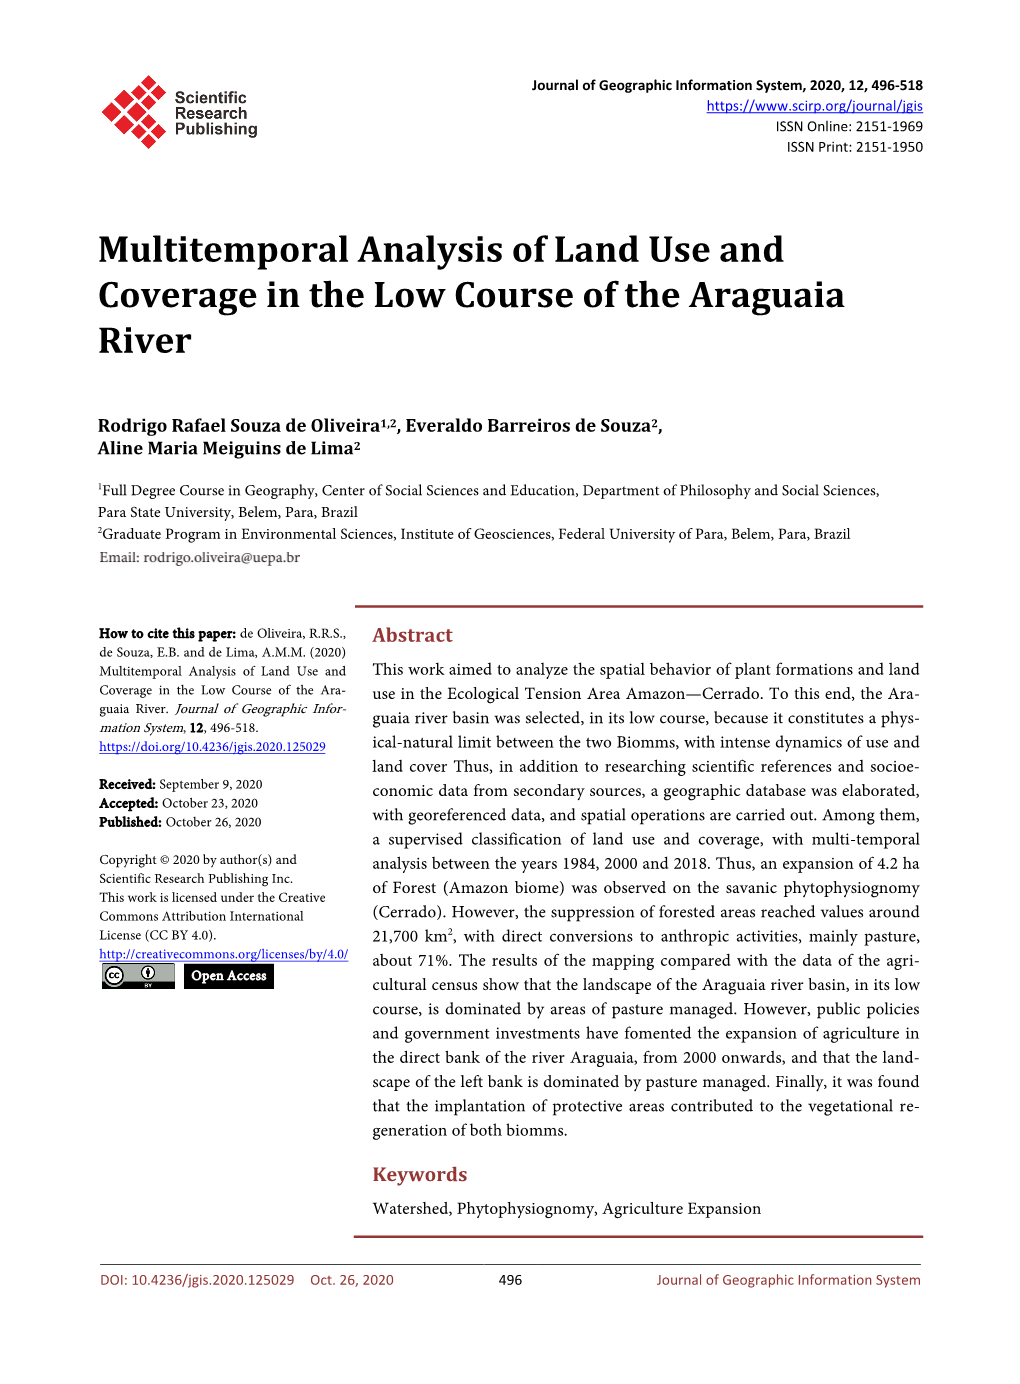 Multitemporal Analysis of Land Use and Coverage in the Low Course of the Araguaia River